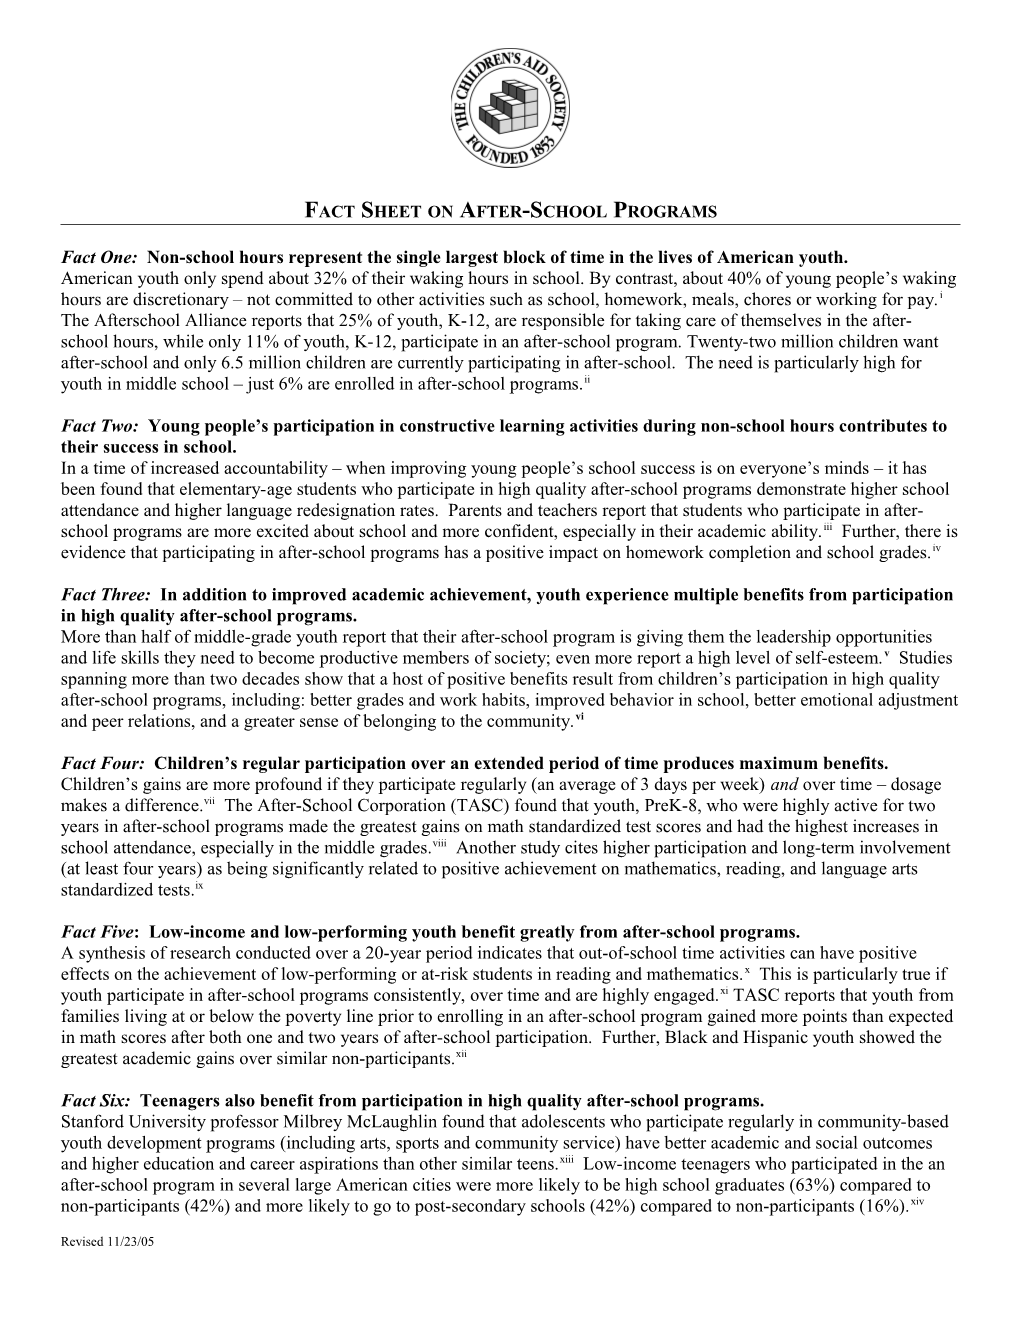 Fact Sheet on After-School Programs